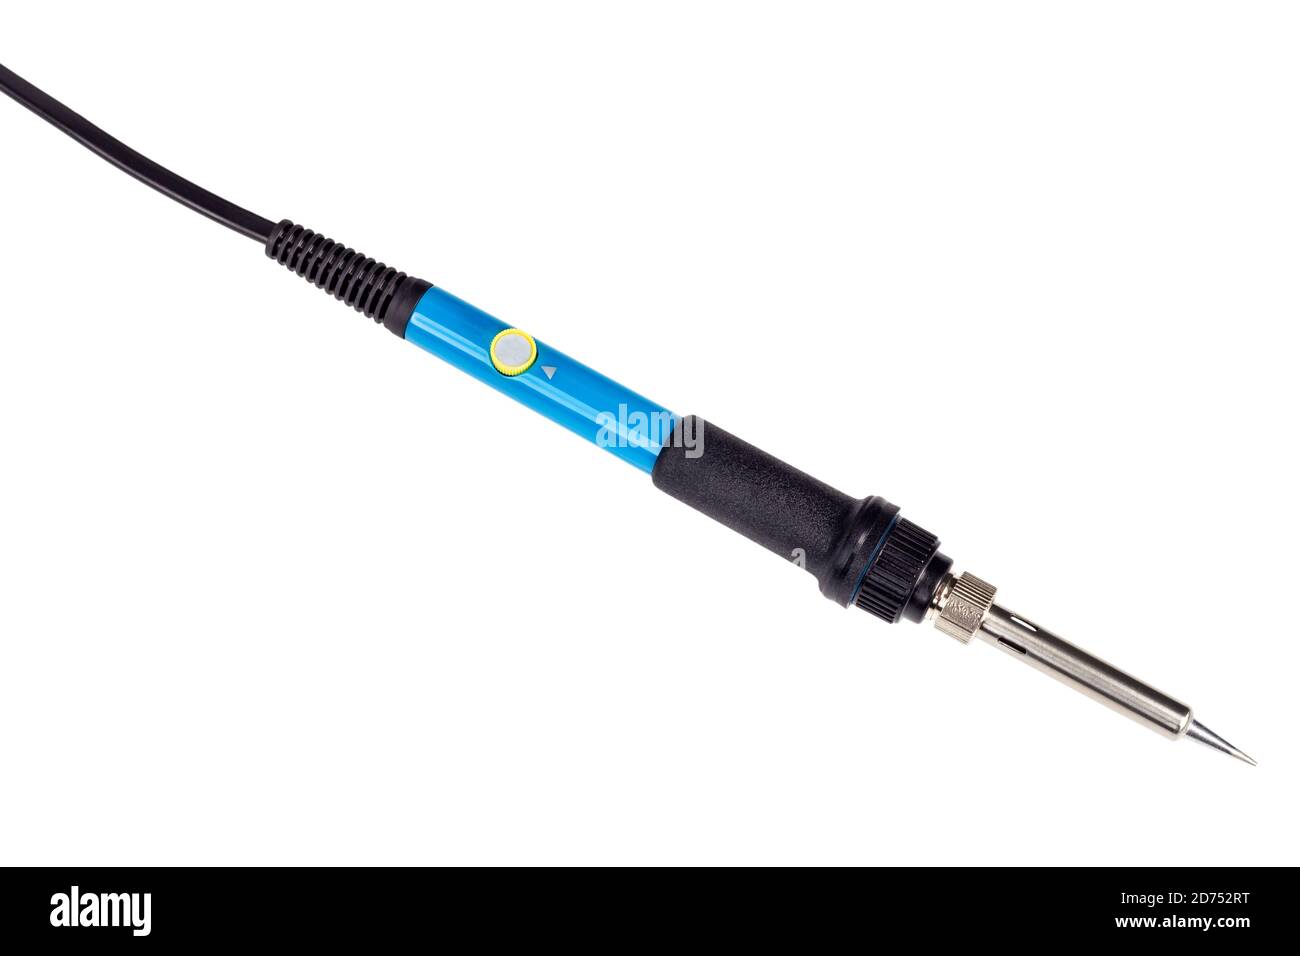 Electric soldering iron with the blue handle isolated on a white background. Stock Photo